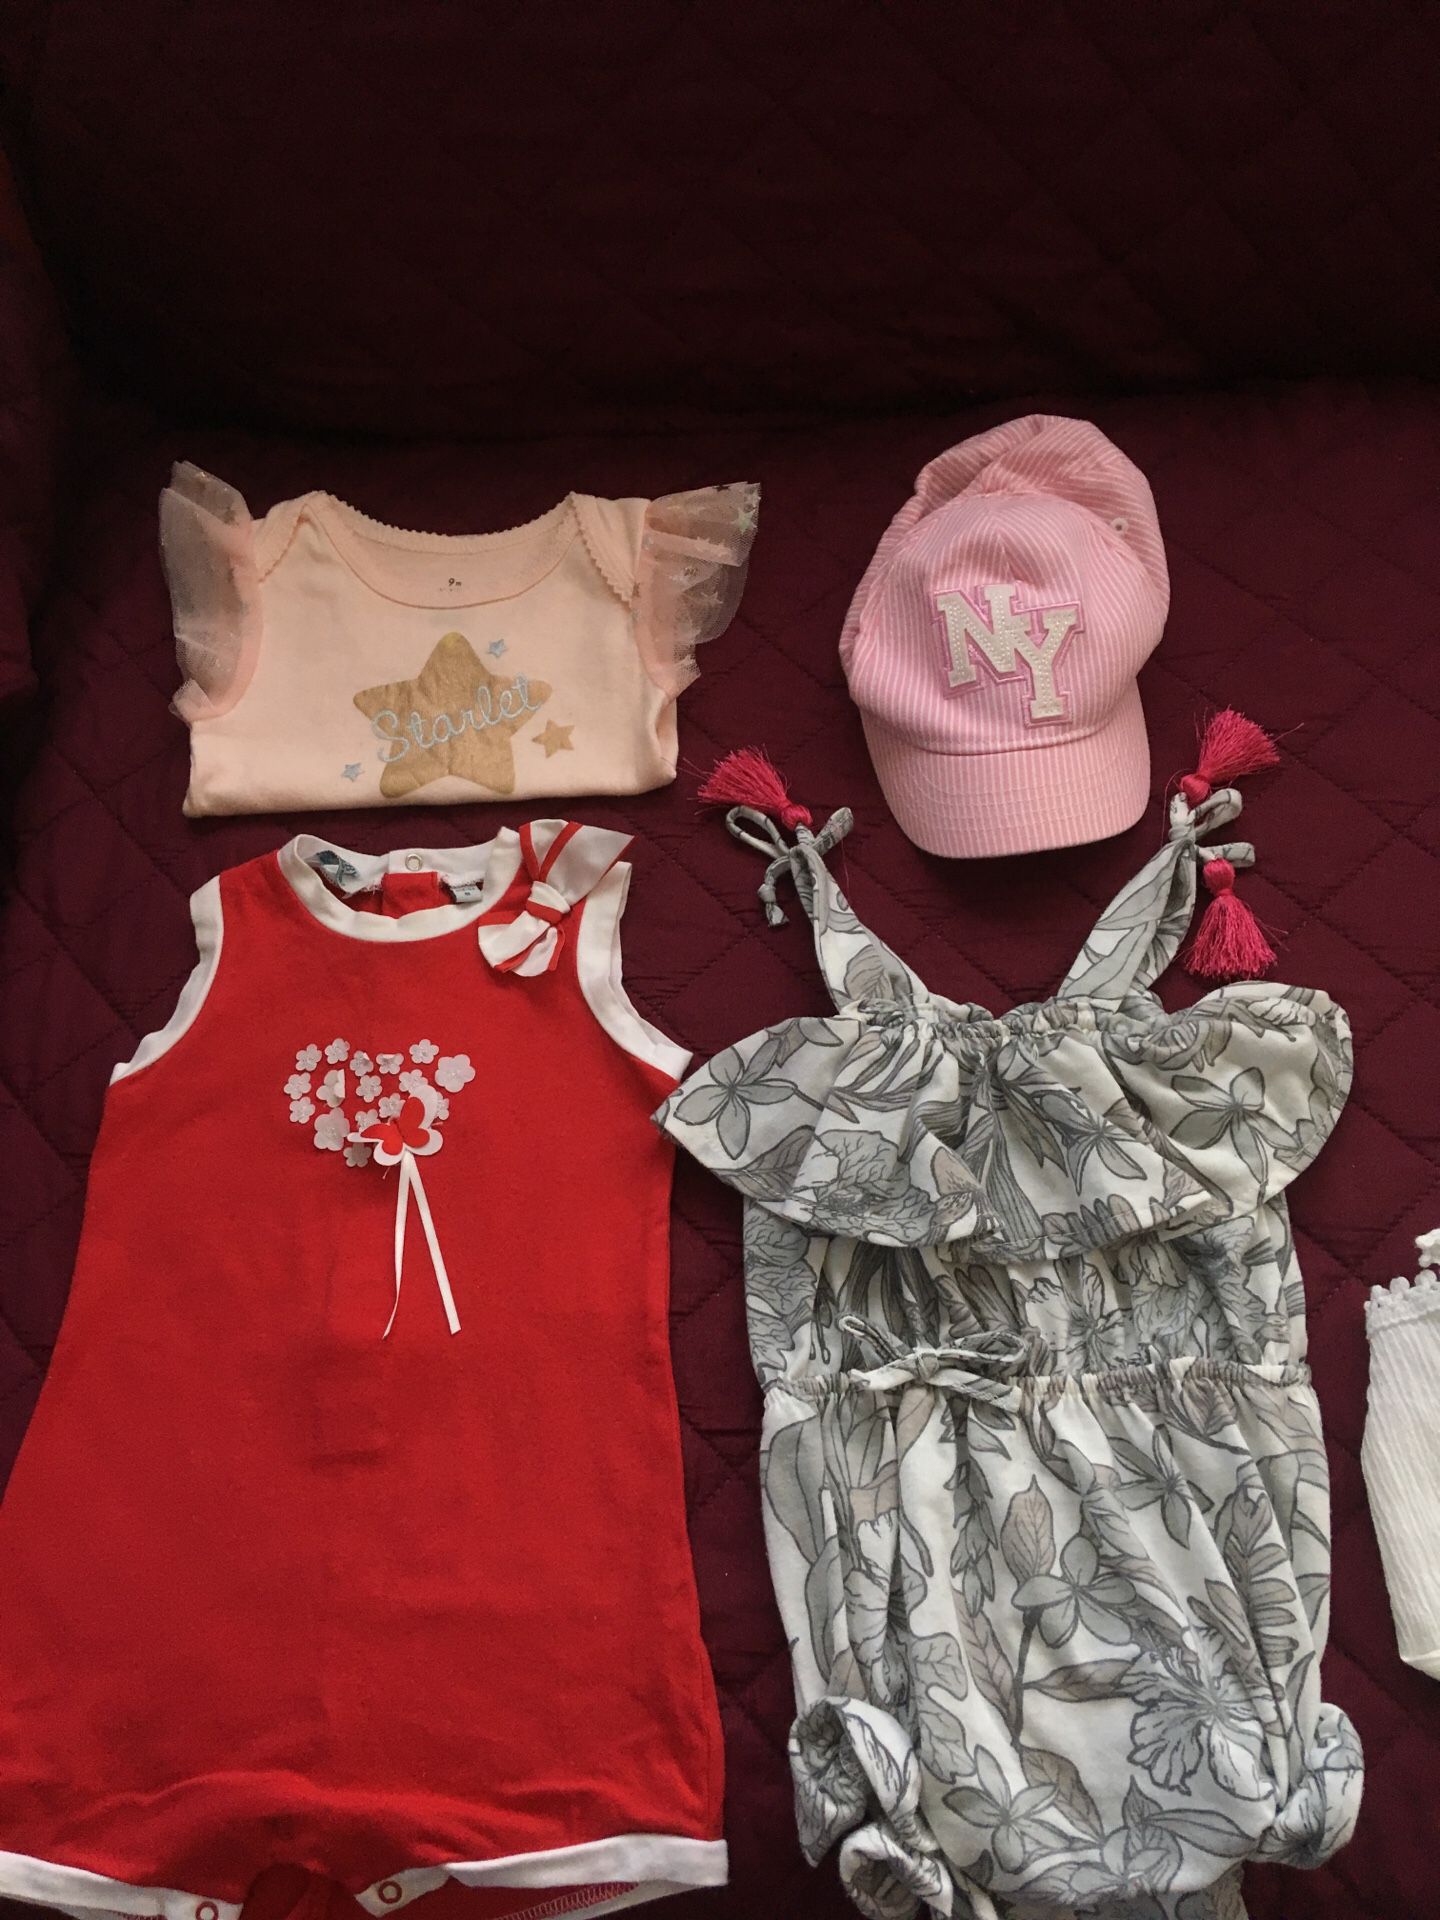 Baby clothes for girl 6-9 months & other stuff